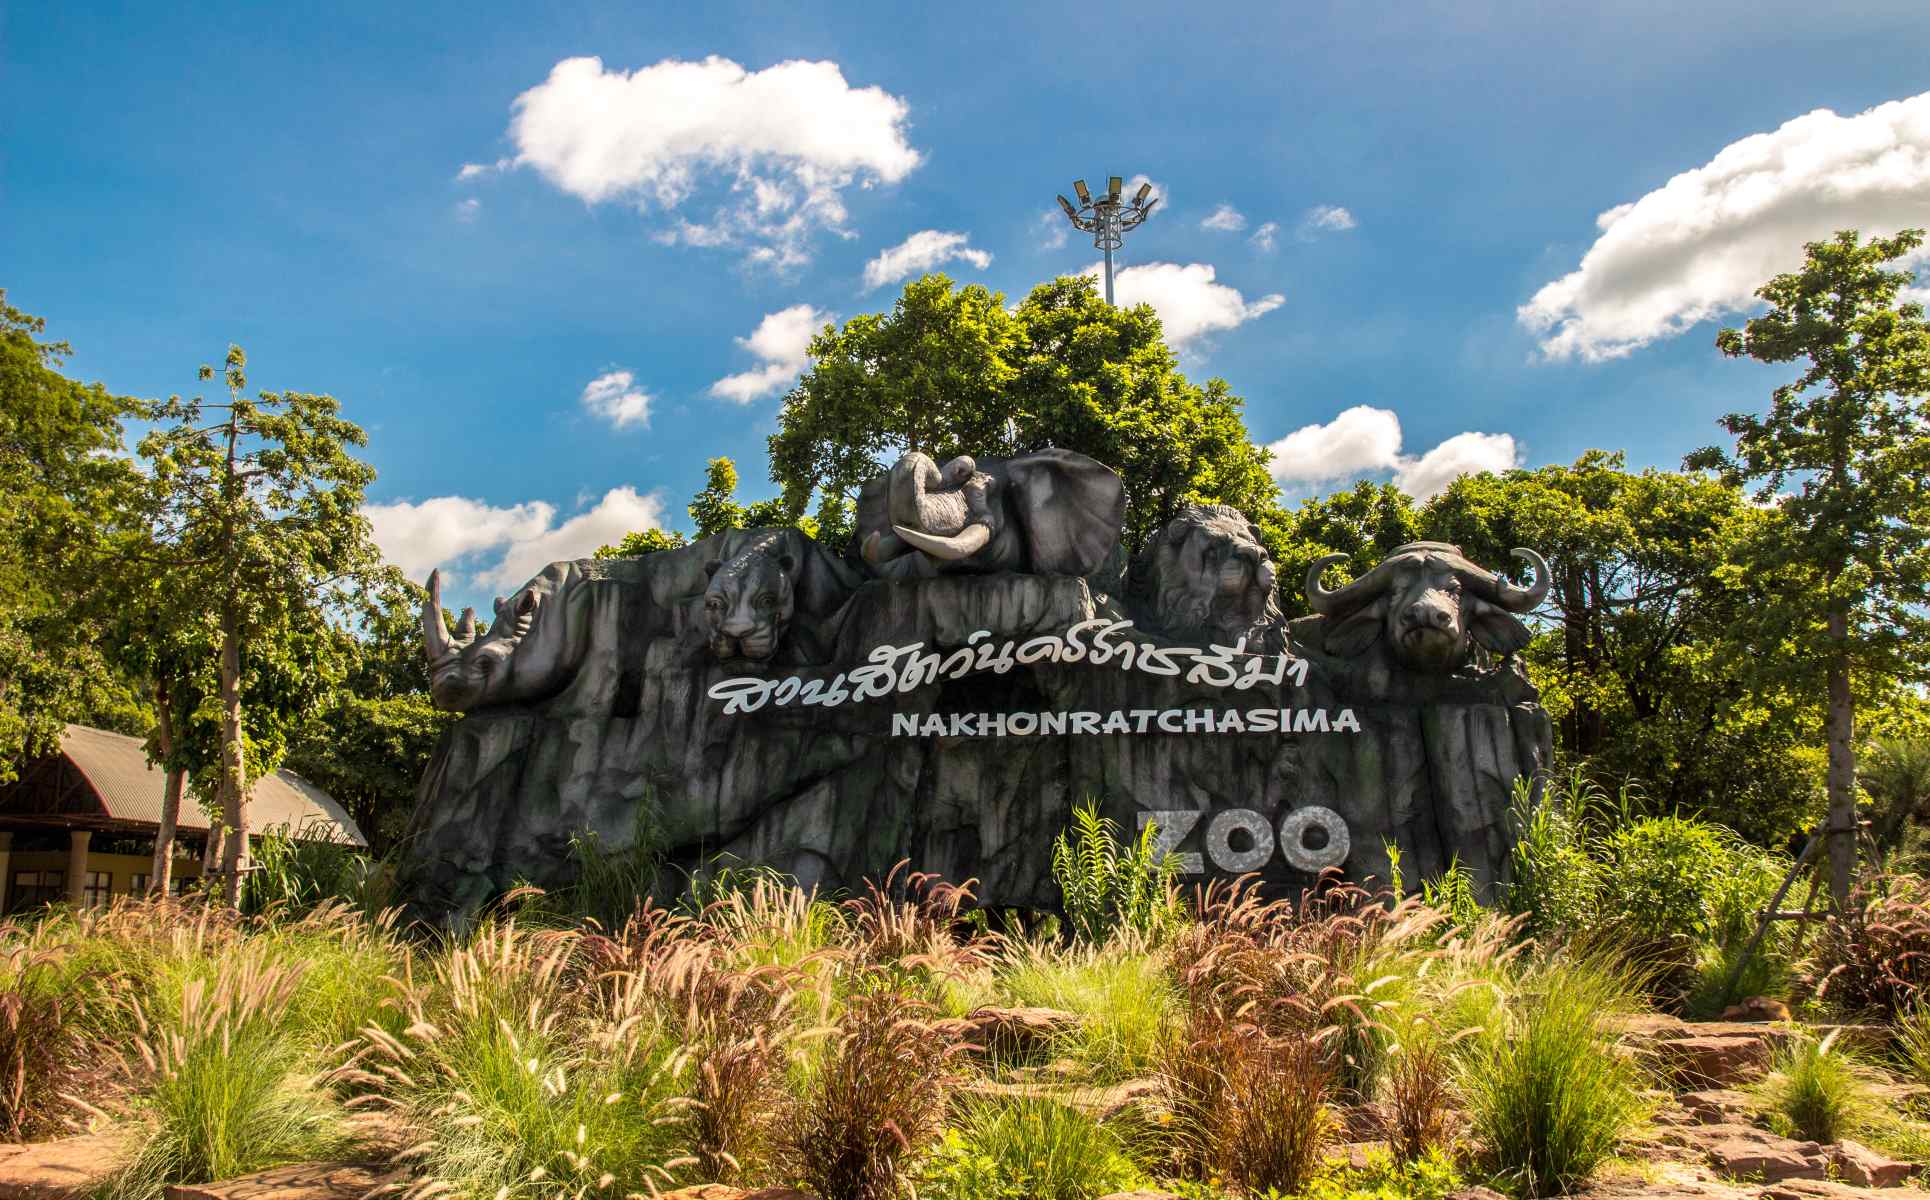 9-mind-blowing-facts-about-nakhon-ratchasima-zoo